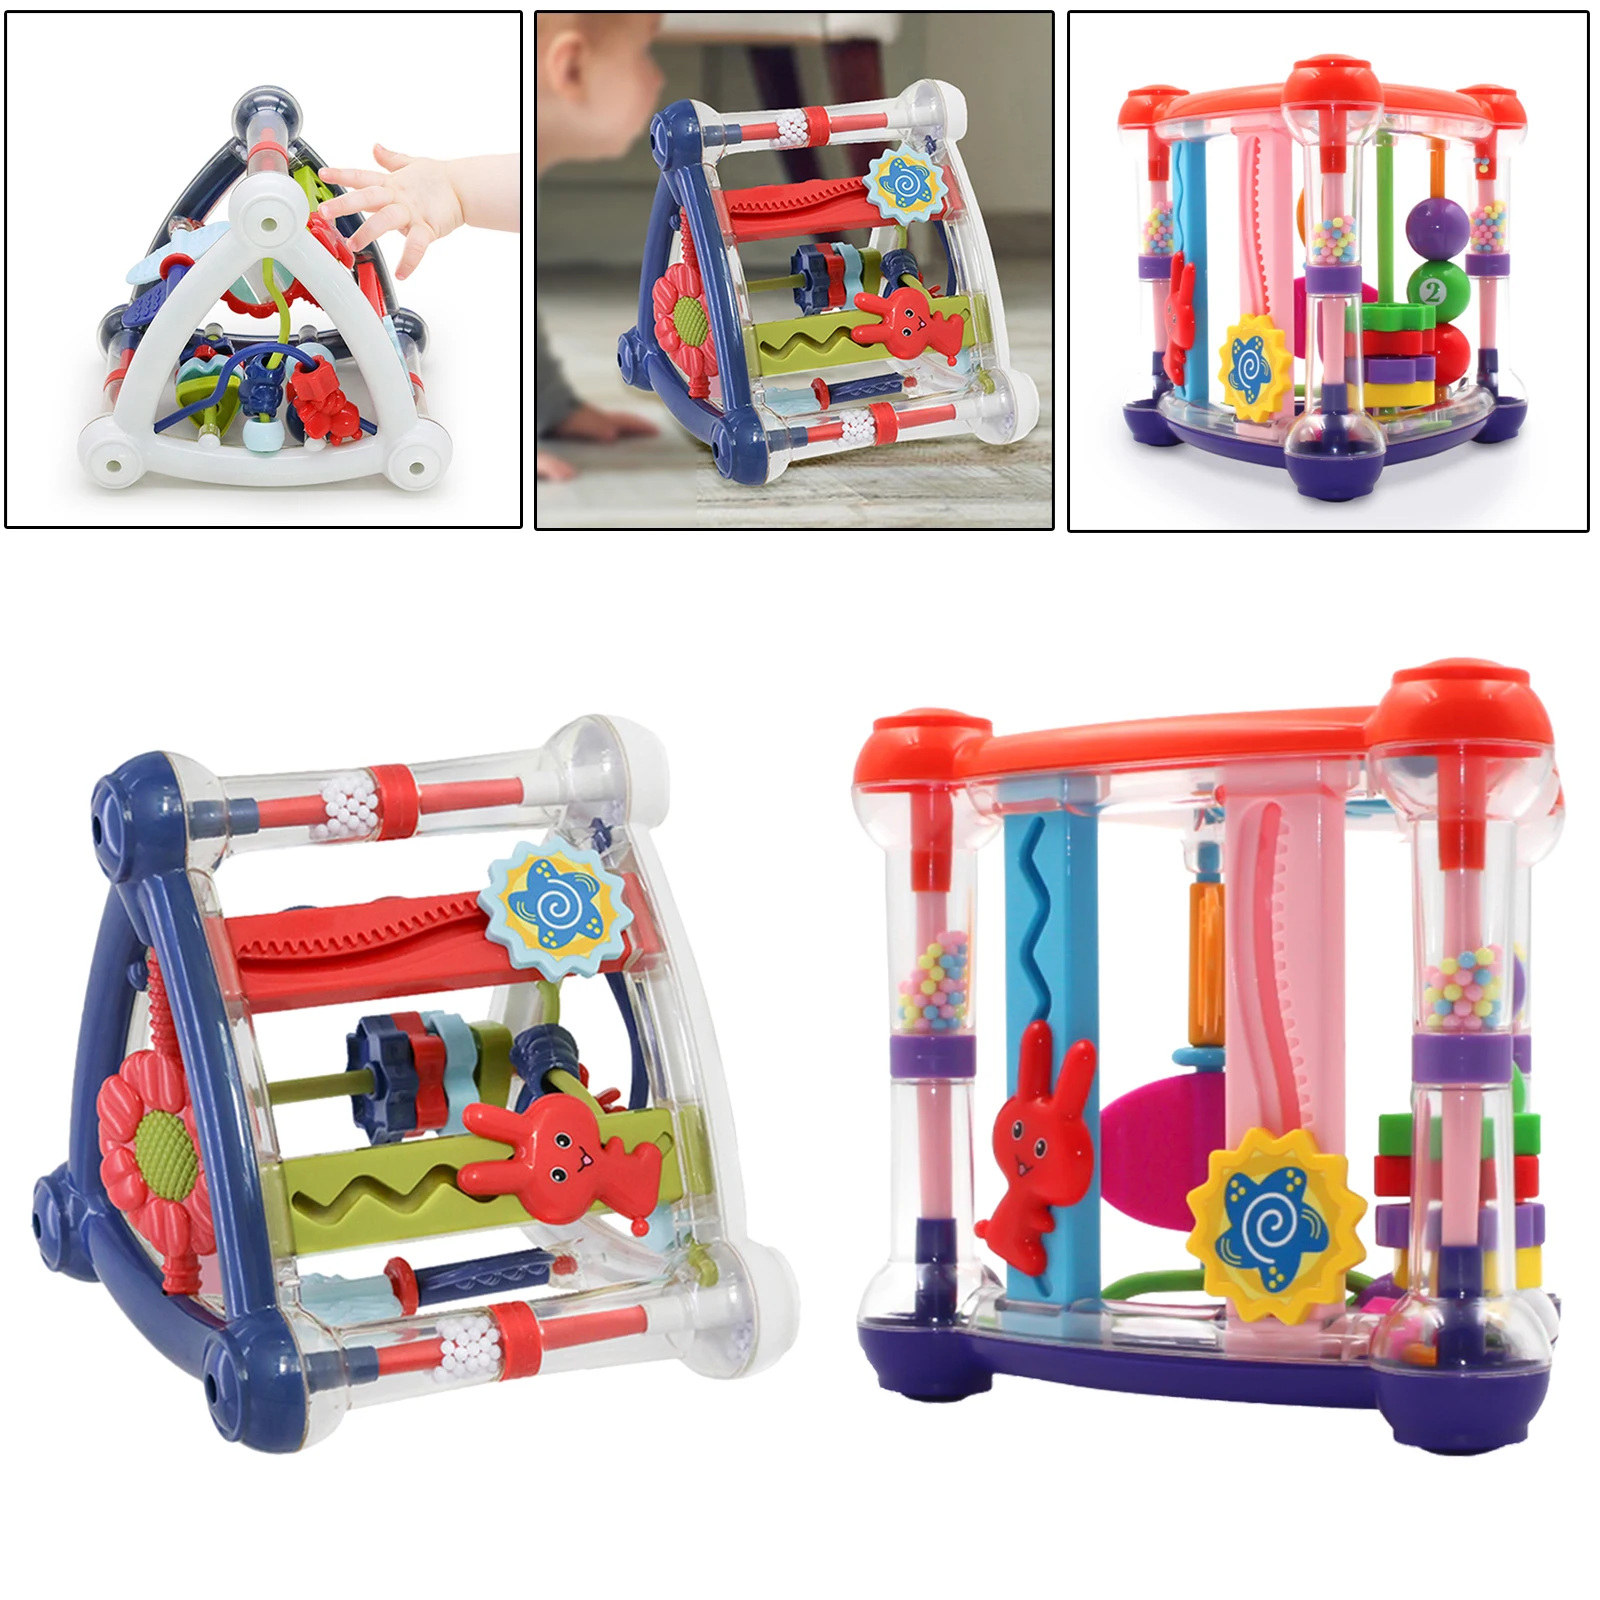 Baby Activity Cube Toy Development Educational Game Play Learning Center Toy for 1 Year Old Baby Toddler Boys and Girls